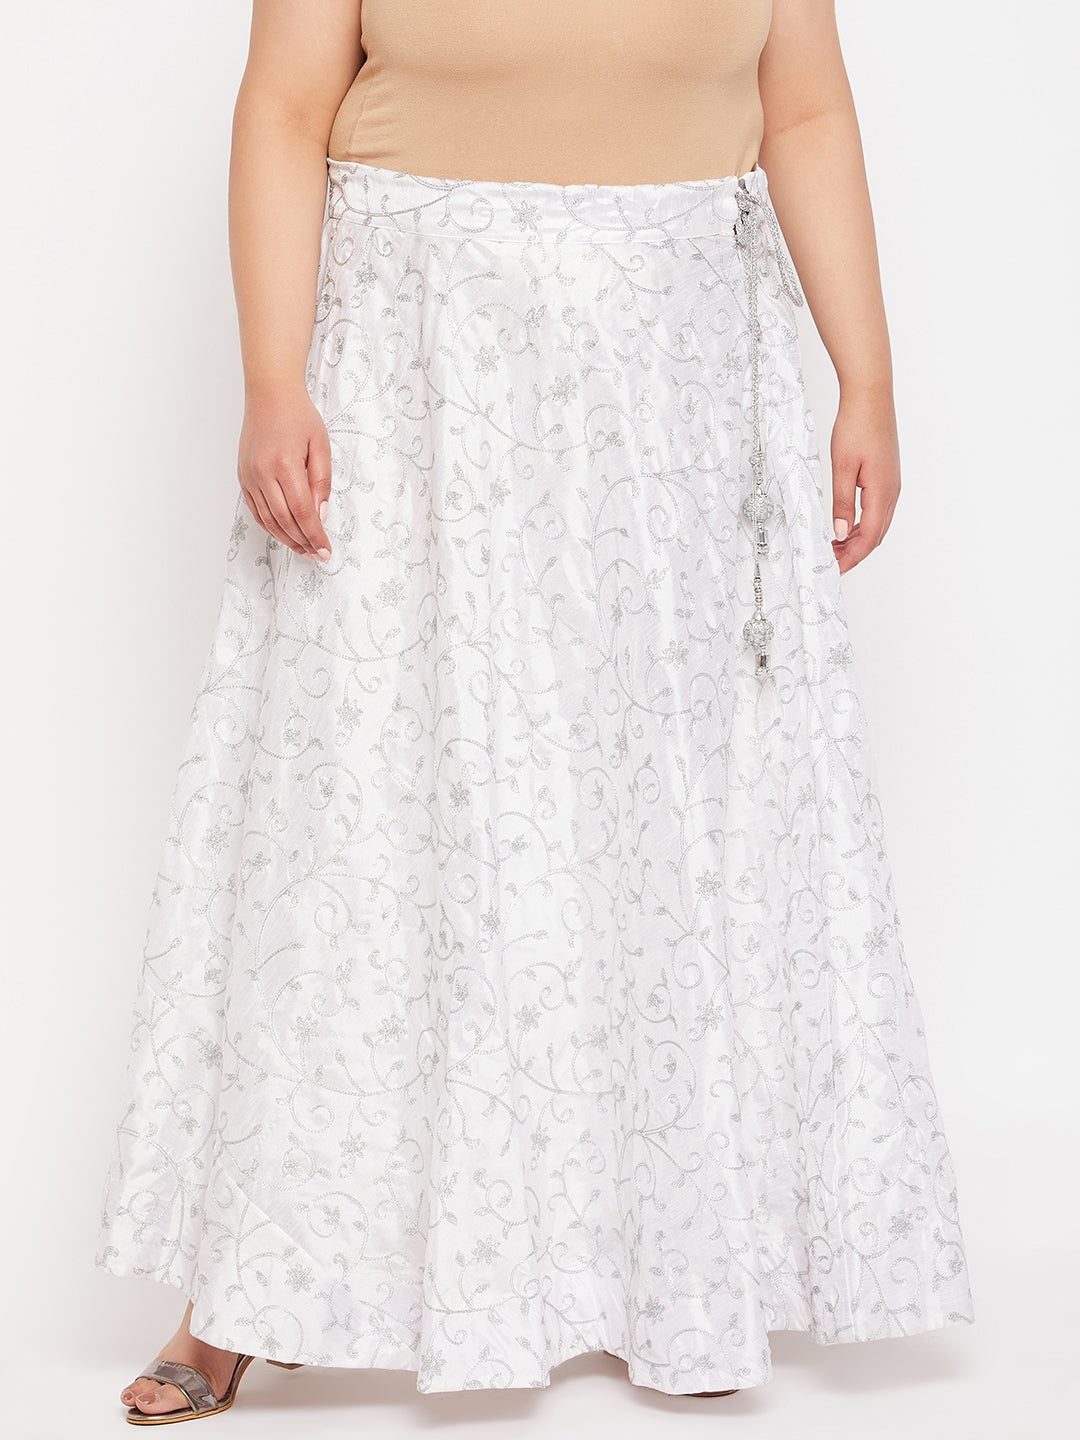 White & Silver Embroidered Flared Skirt